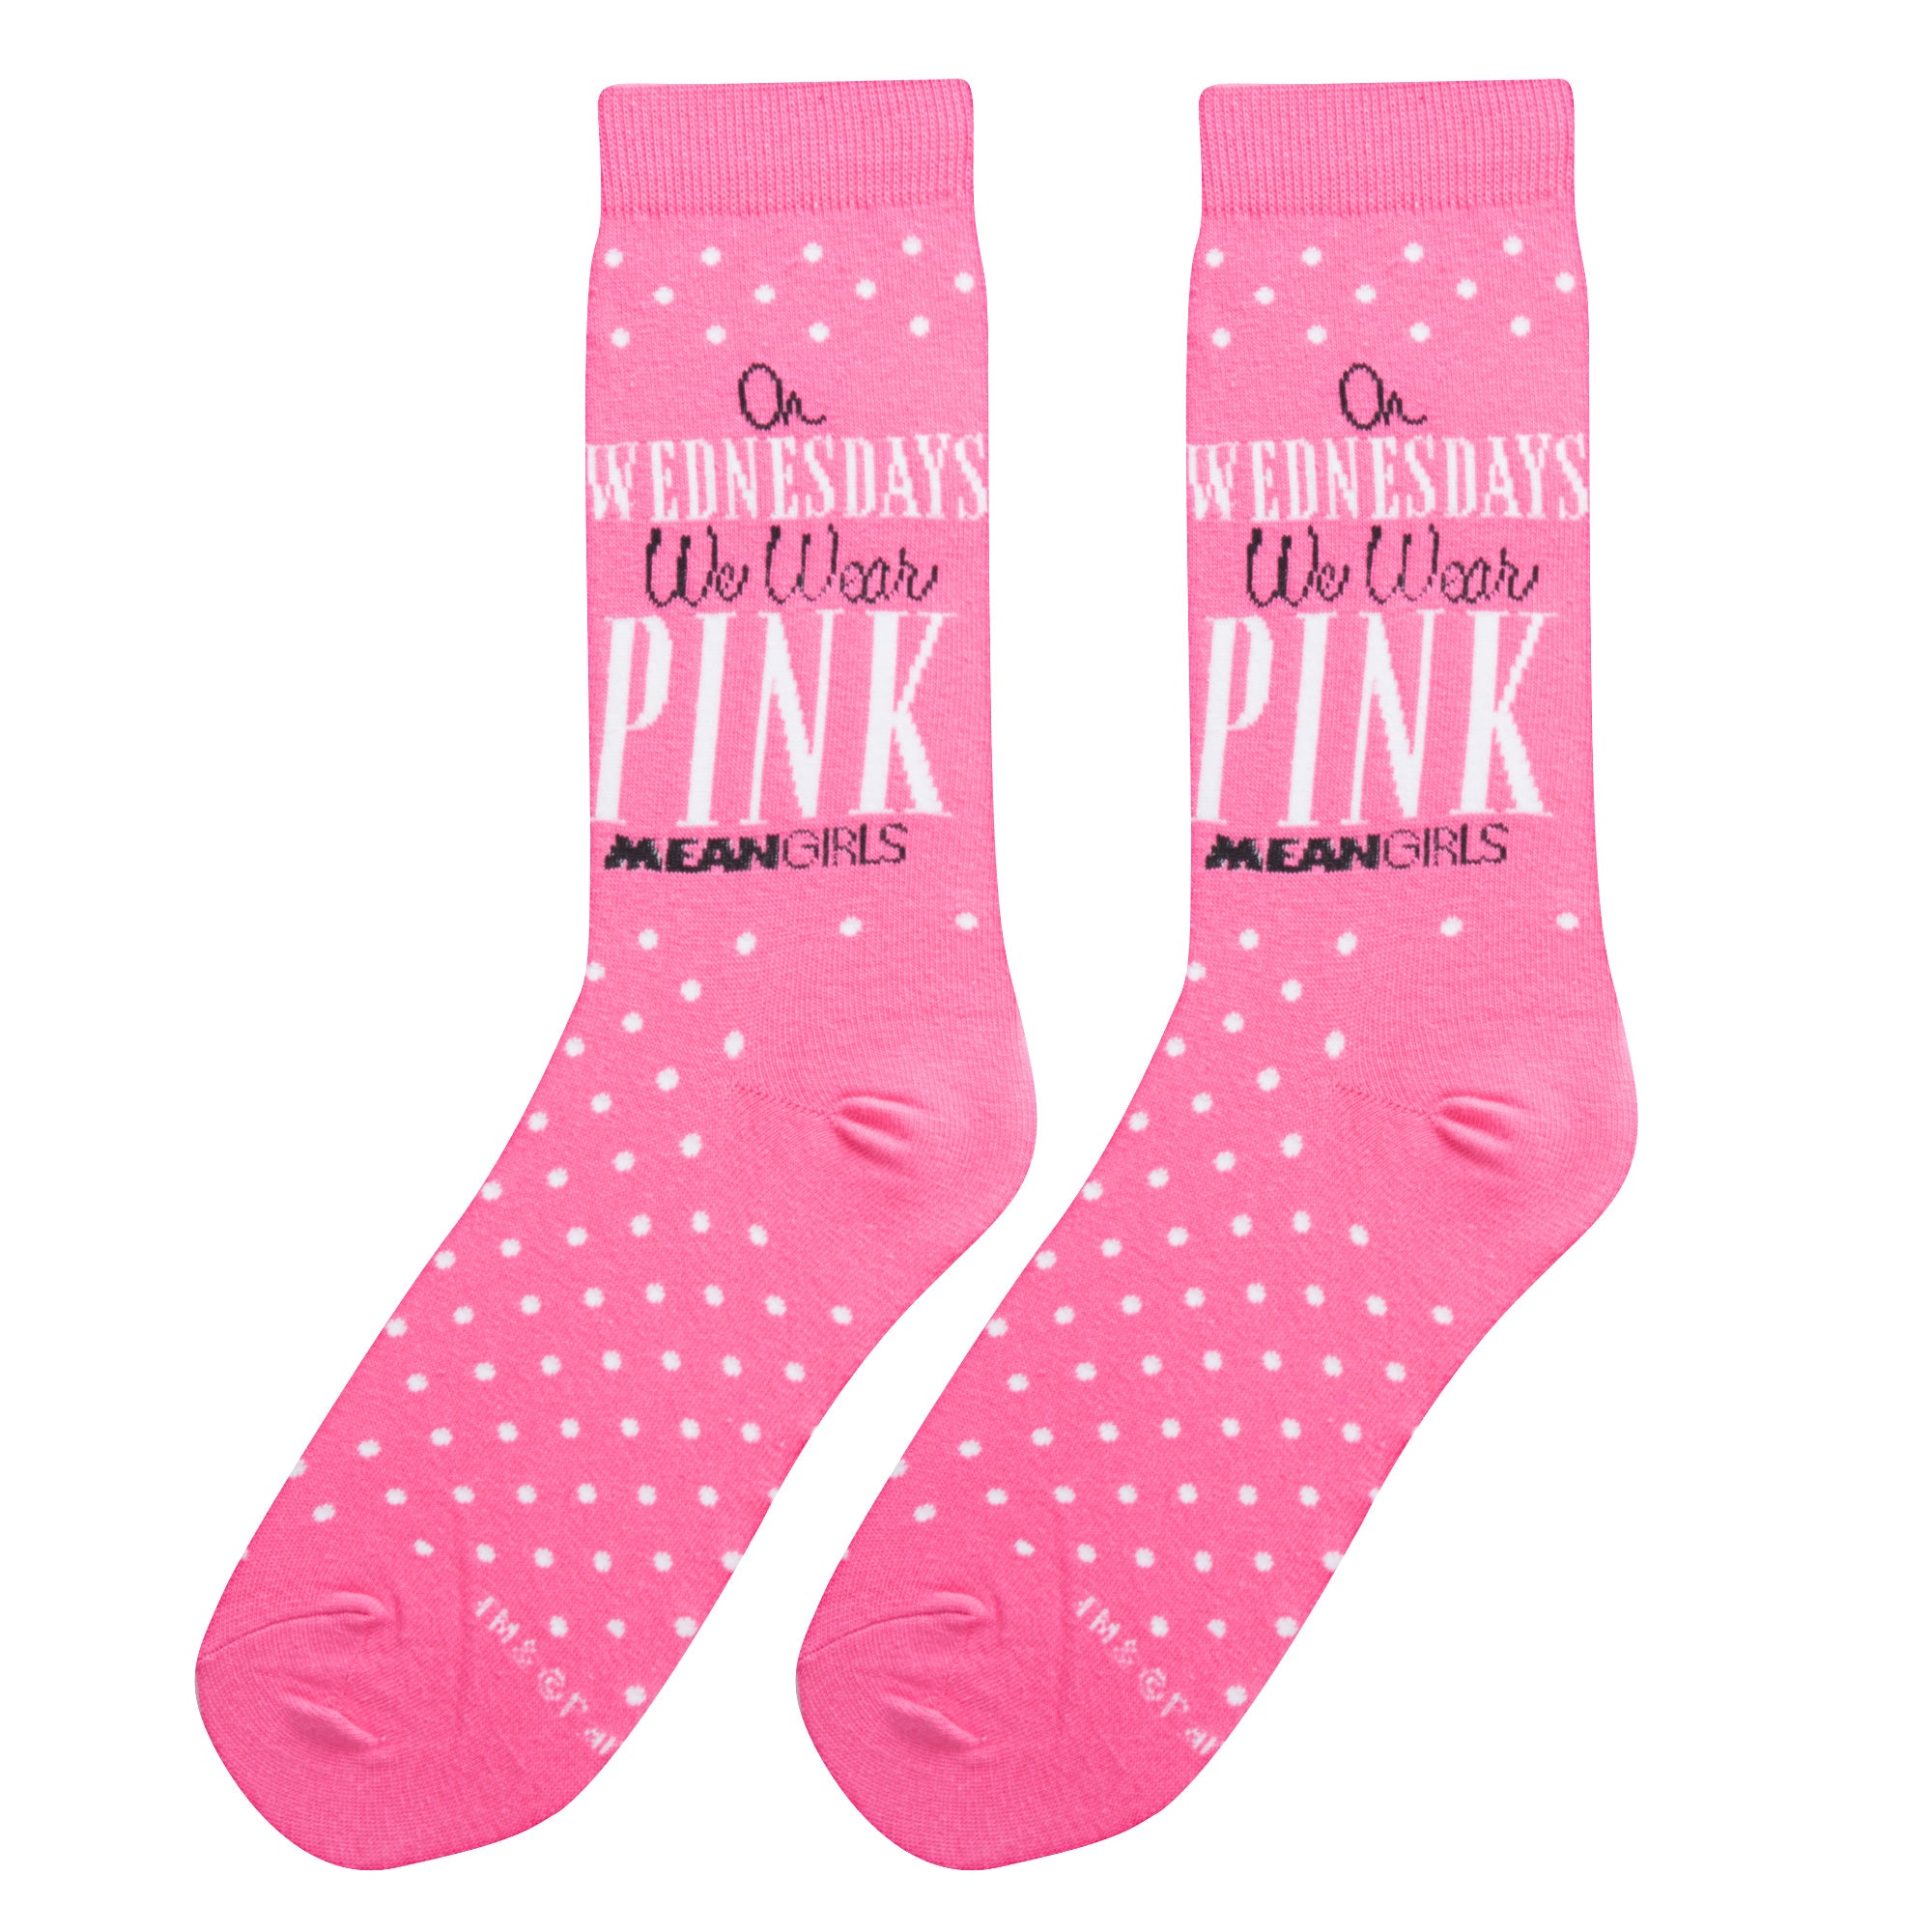 Mean Girls Socks On Wednesdays we wear pink NWTs